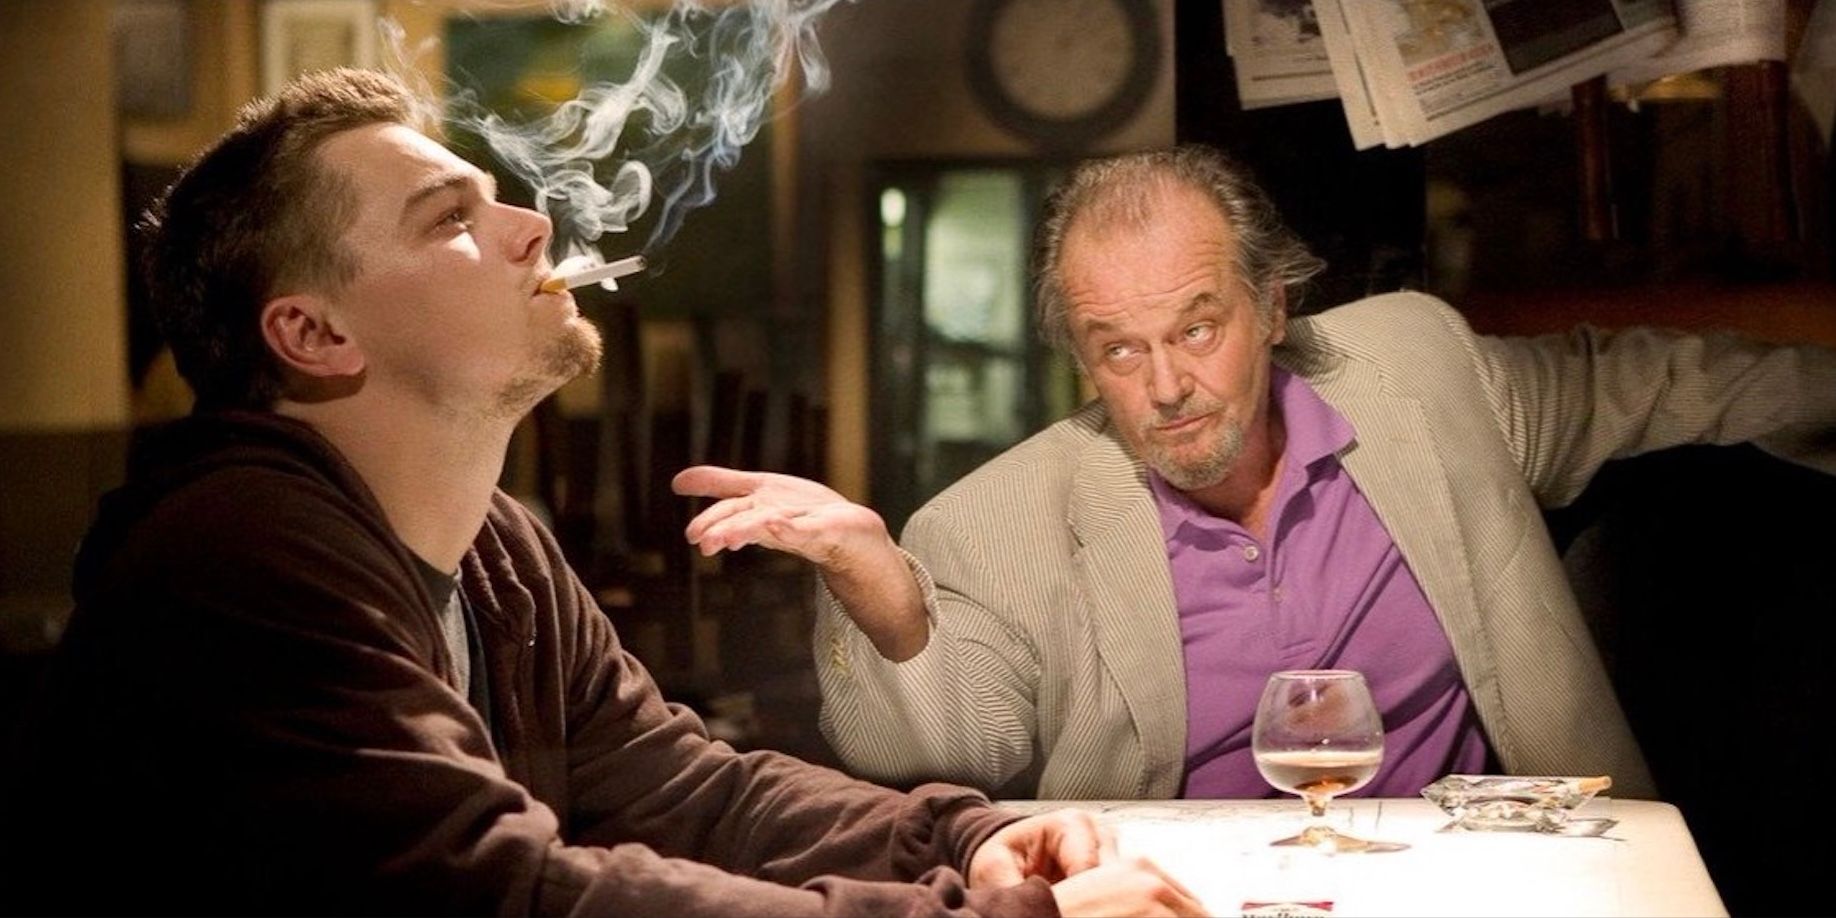 THE DEPARTED 2006 SCORSESE DICAPRIO NICHOLSON